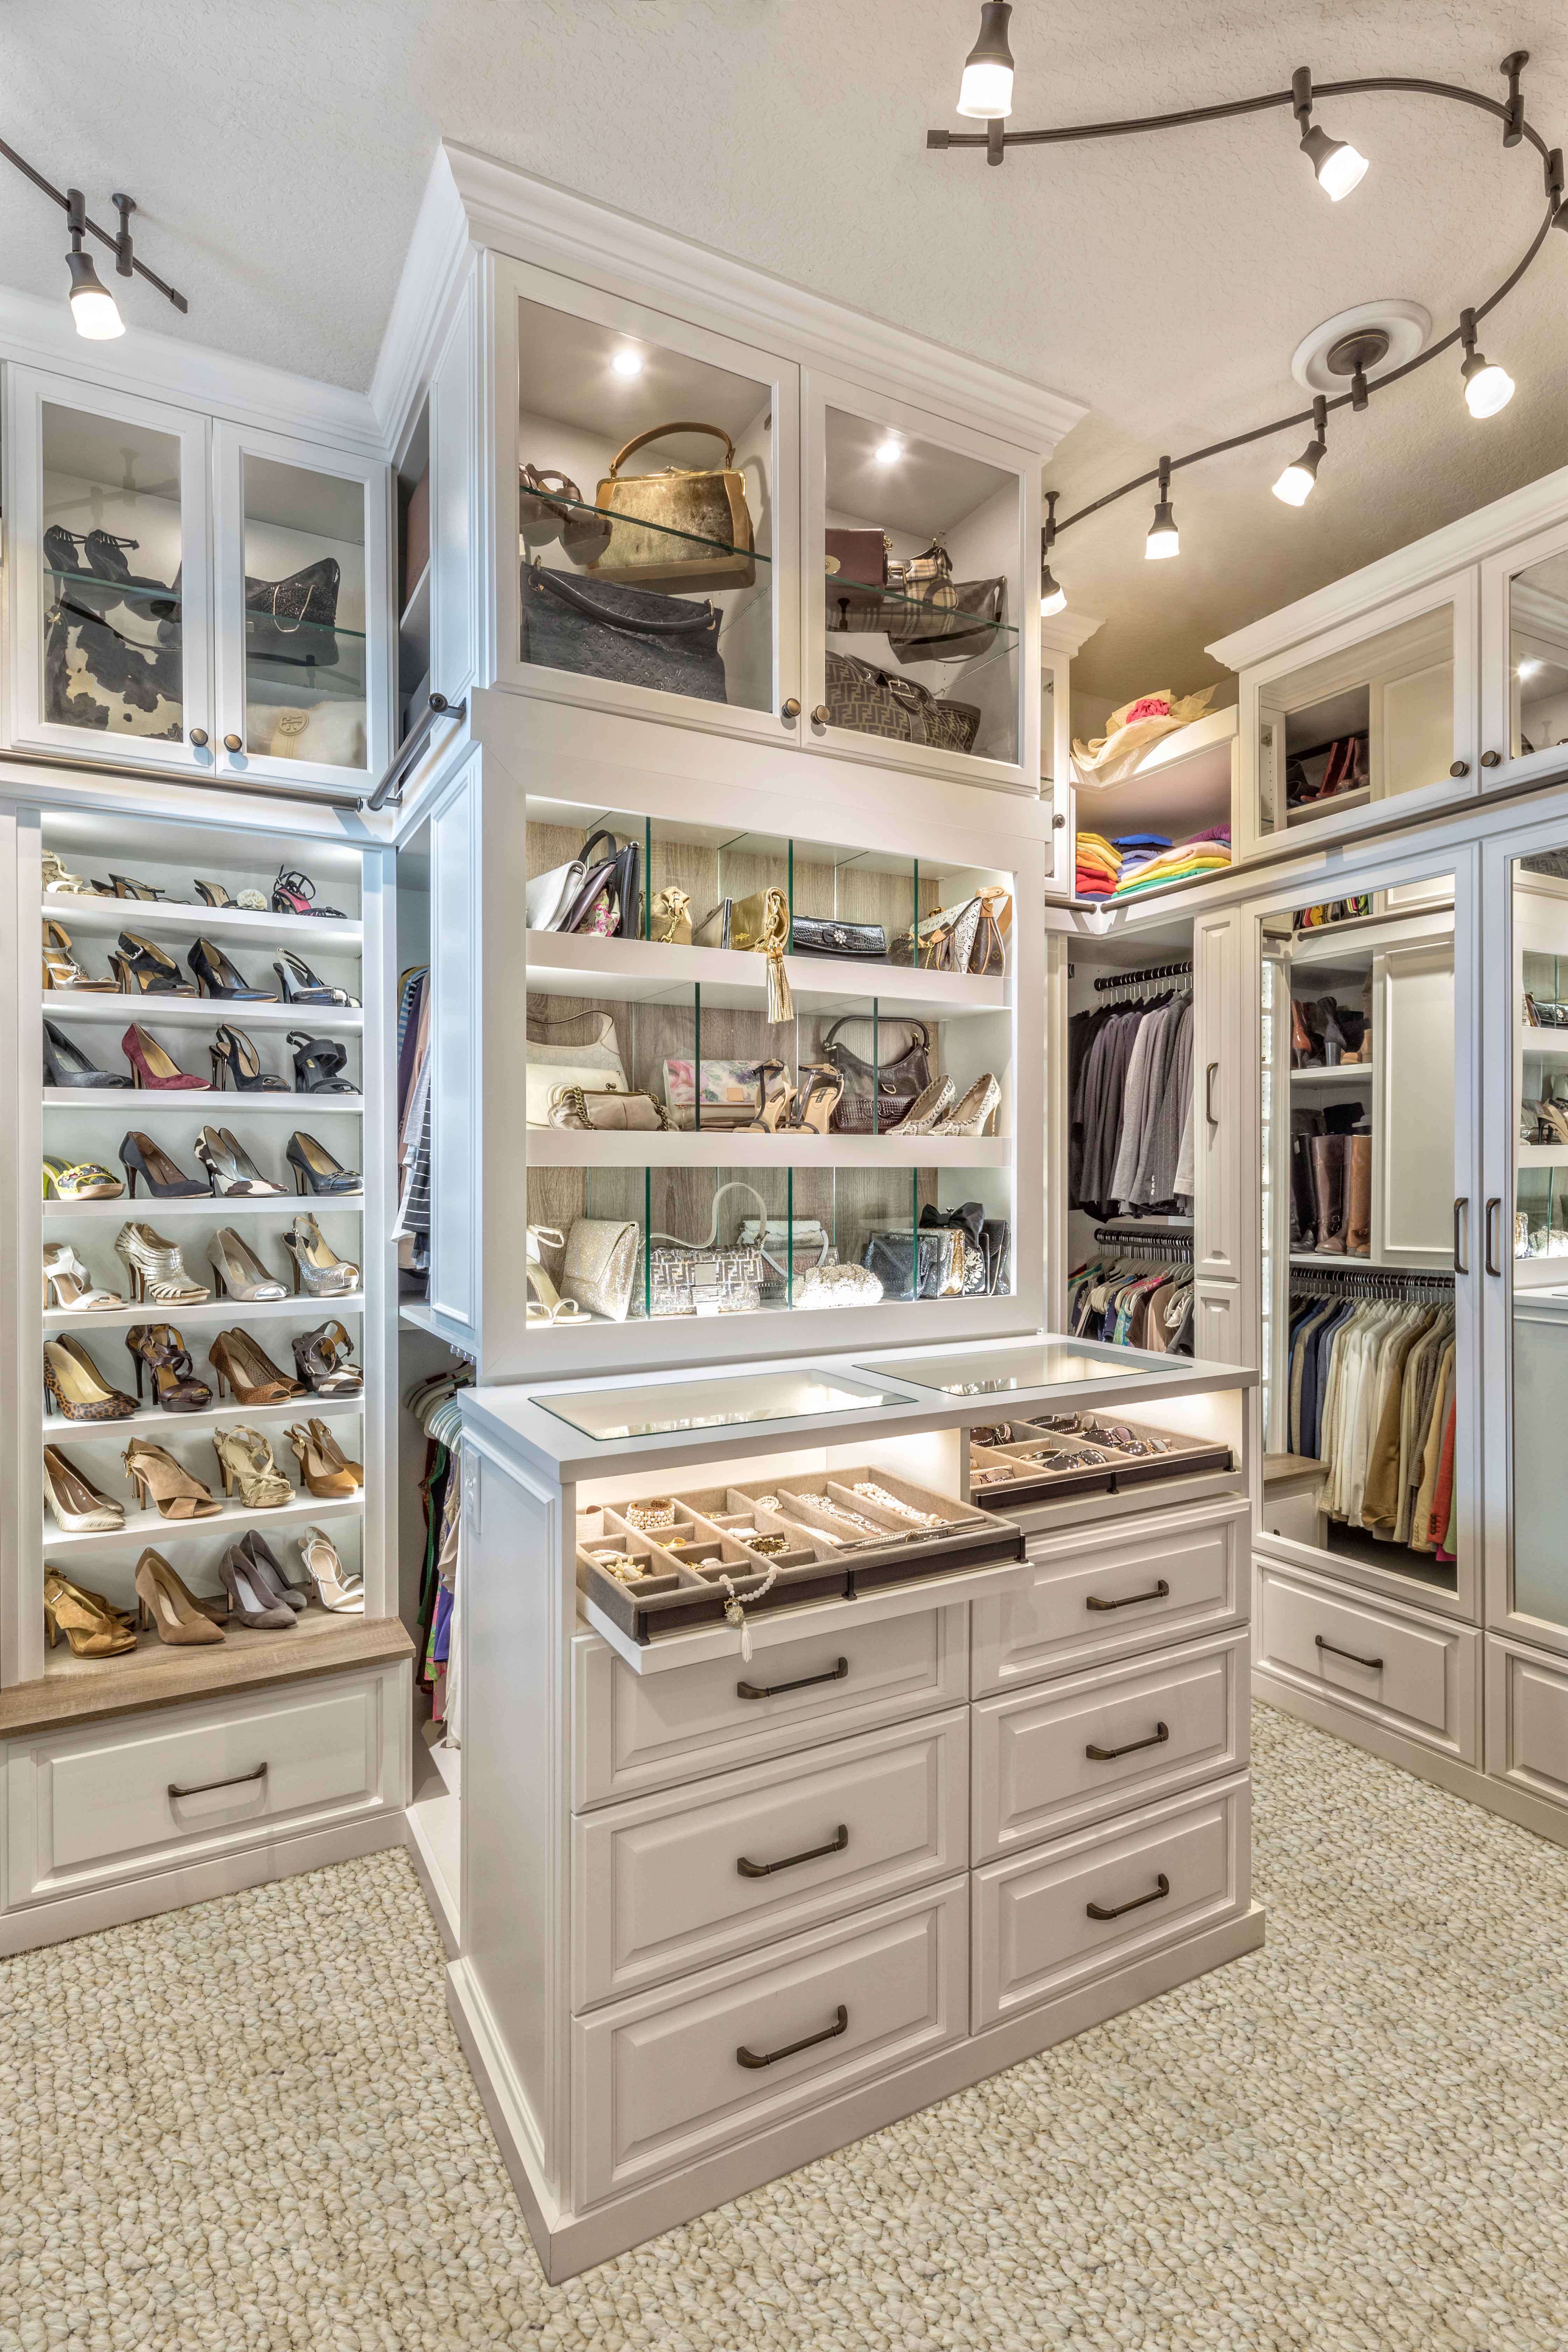 Four Basic Strategies to Create the Perfect Curated Walk-in Closet | Closet Factory